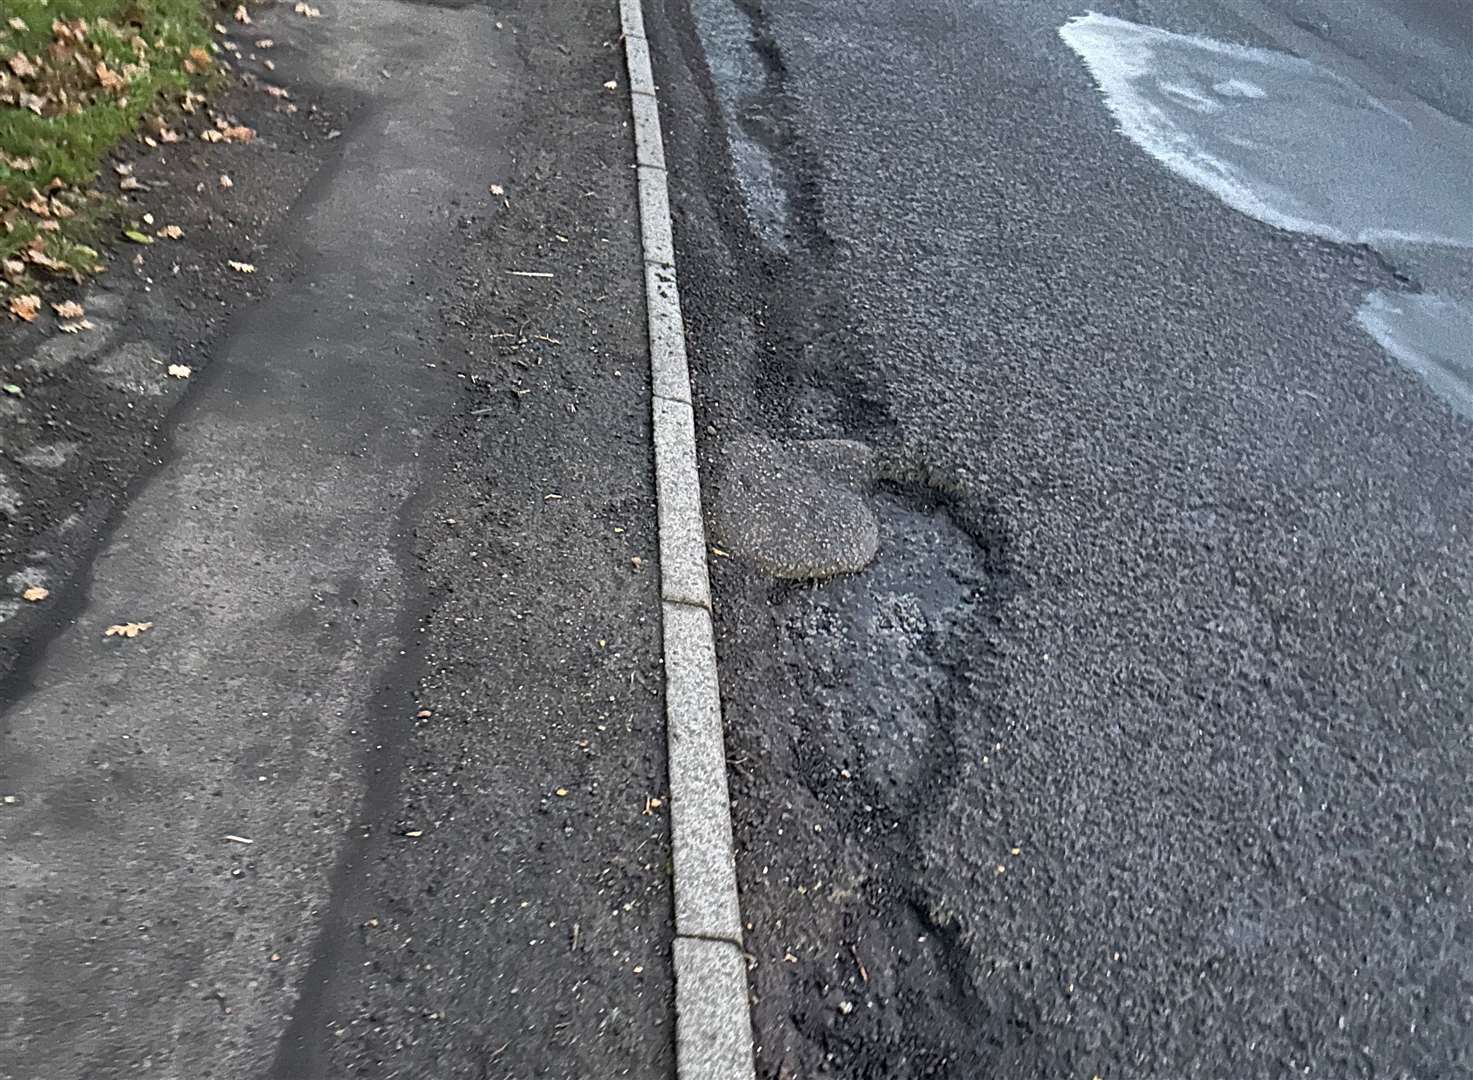 There are concerns the surface will only get worse if KCC does not make repairs soon. Picture: David Ward